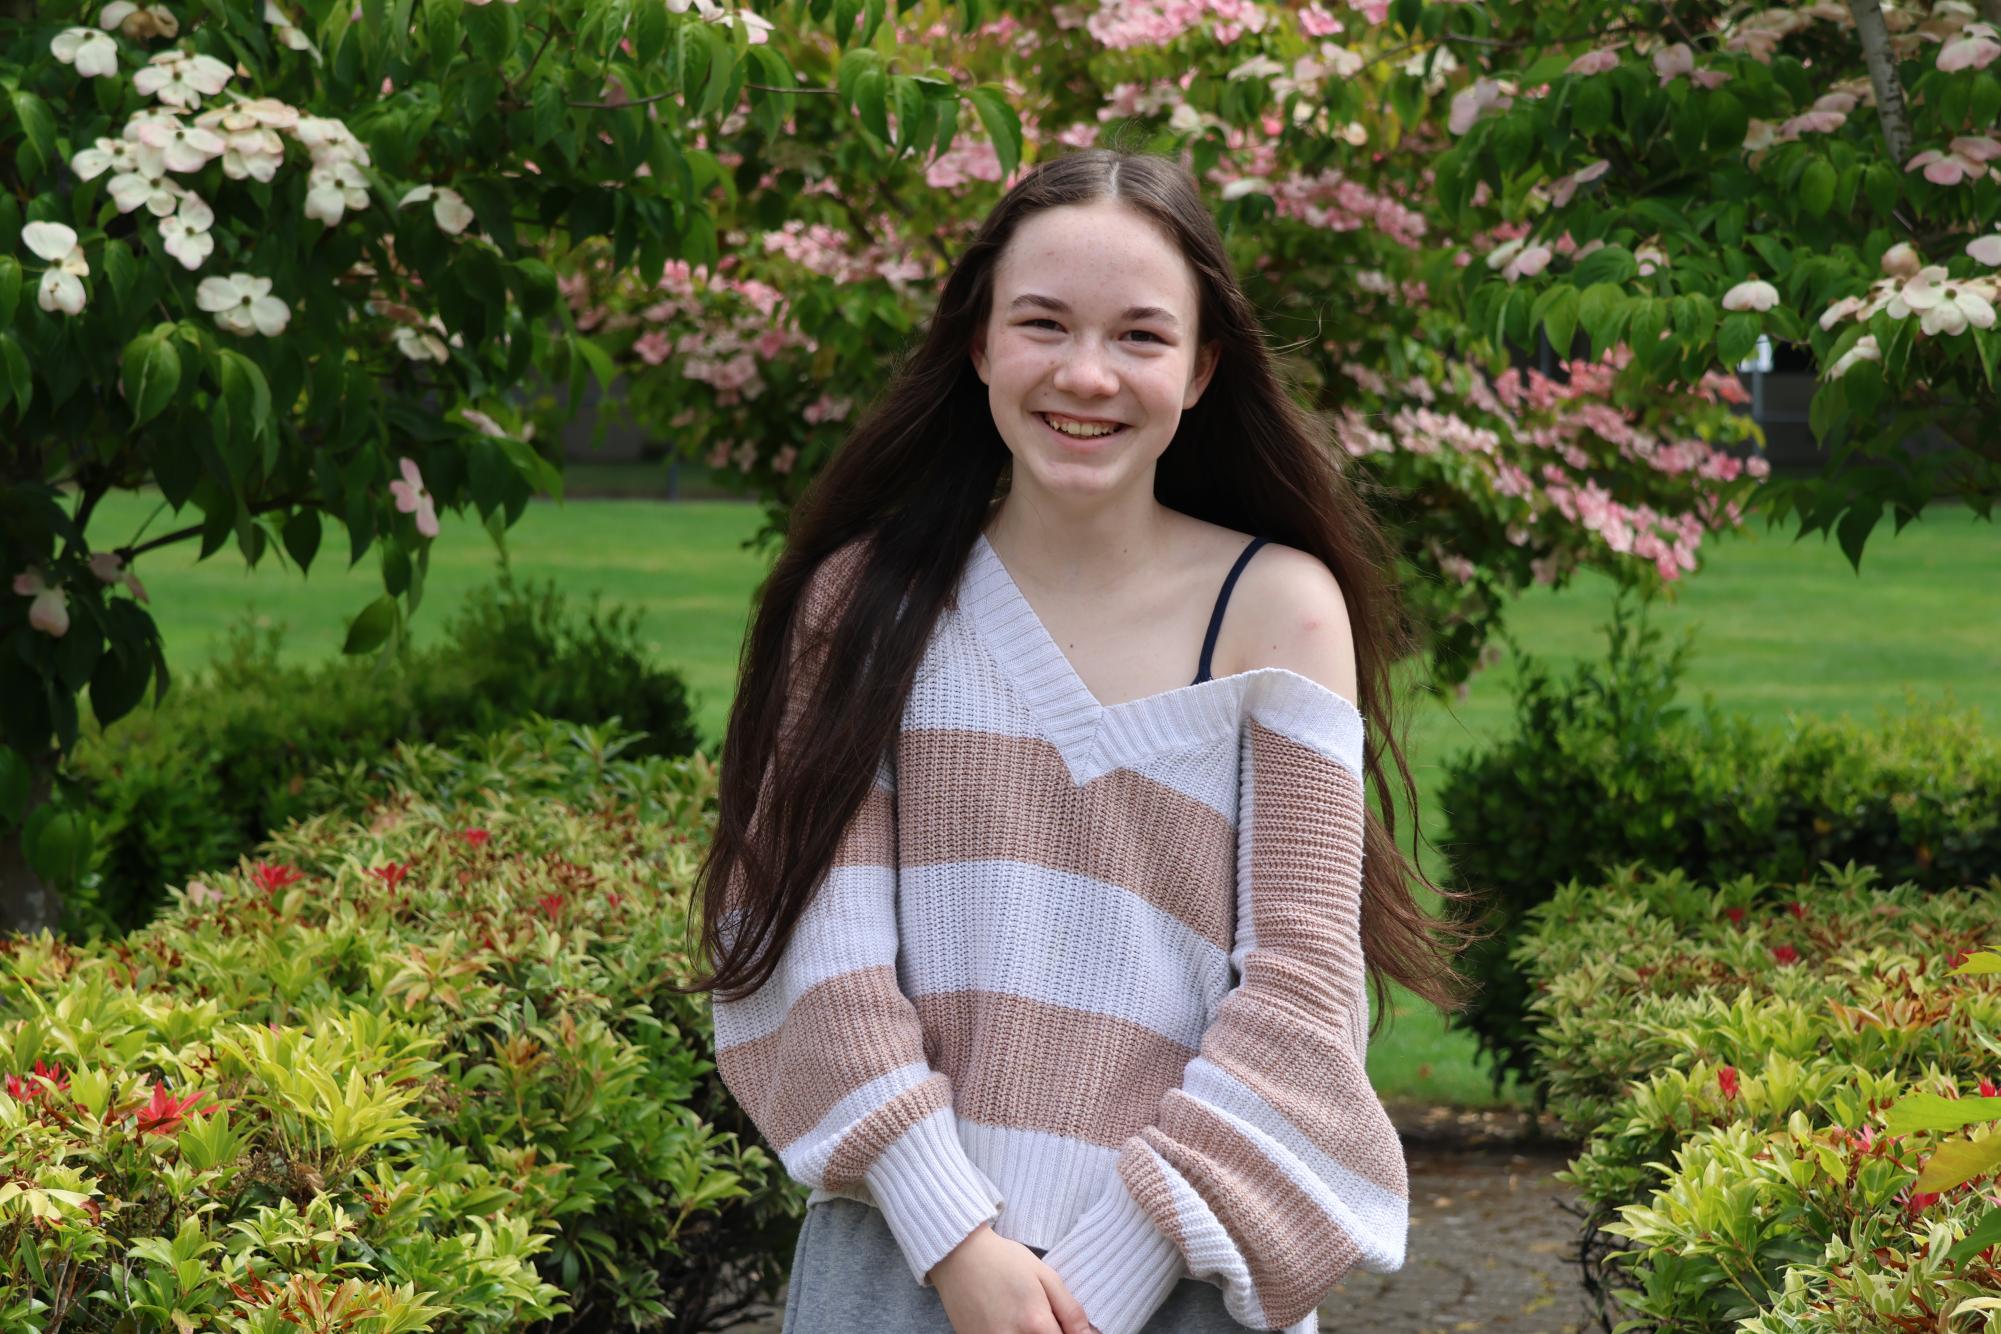 Coming from Holy Family Catholic School, freshman Kiera Olson followed in the footsteps of her older brothers to La Salle, and in doing so learned how to find her voice, try new things, and be comfortable with whatever life may take her. 